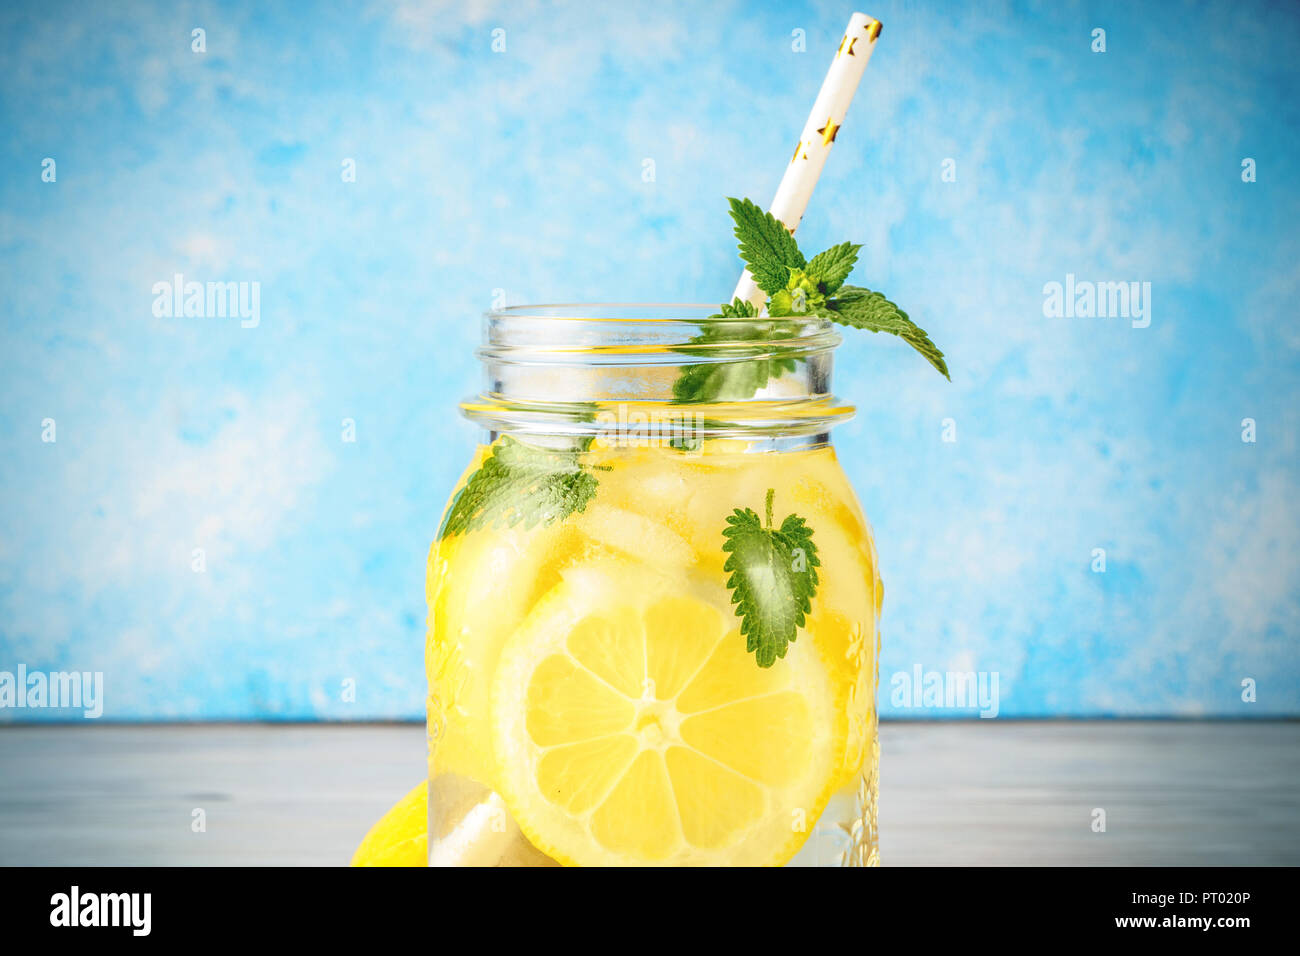 Coctail jar of lemonade and mint leaves on wooden table blue background Natural lemon water homemade food is popular detox beverage Glass of antioxidant infusion. Stock Photo